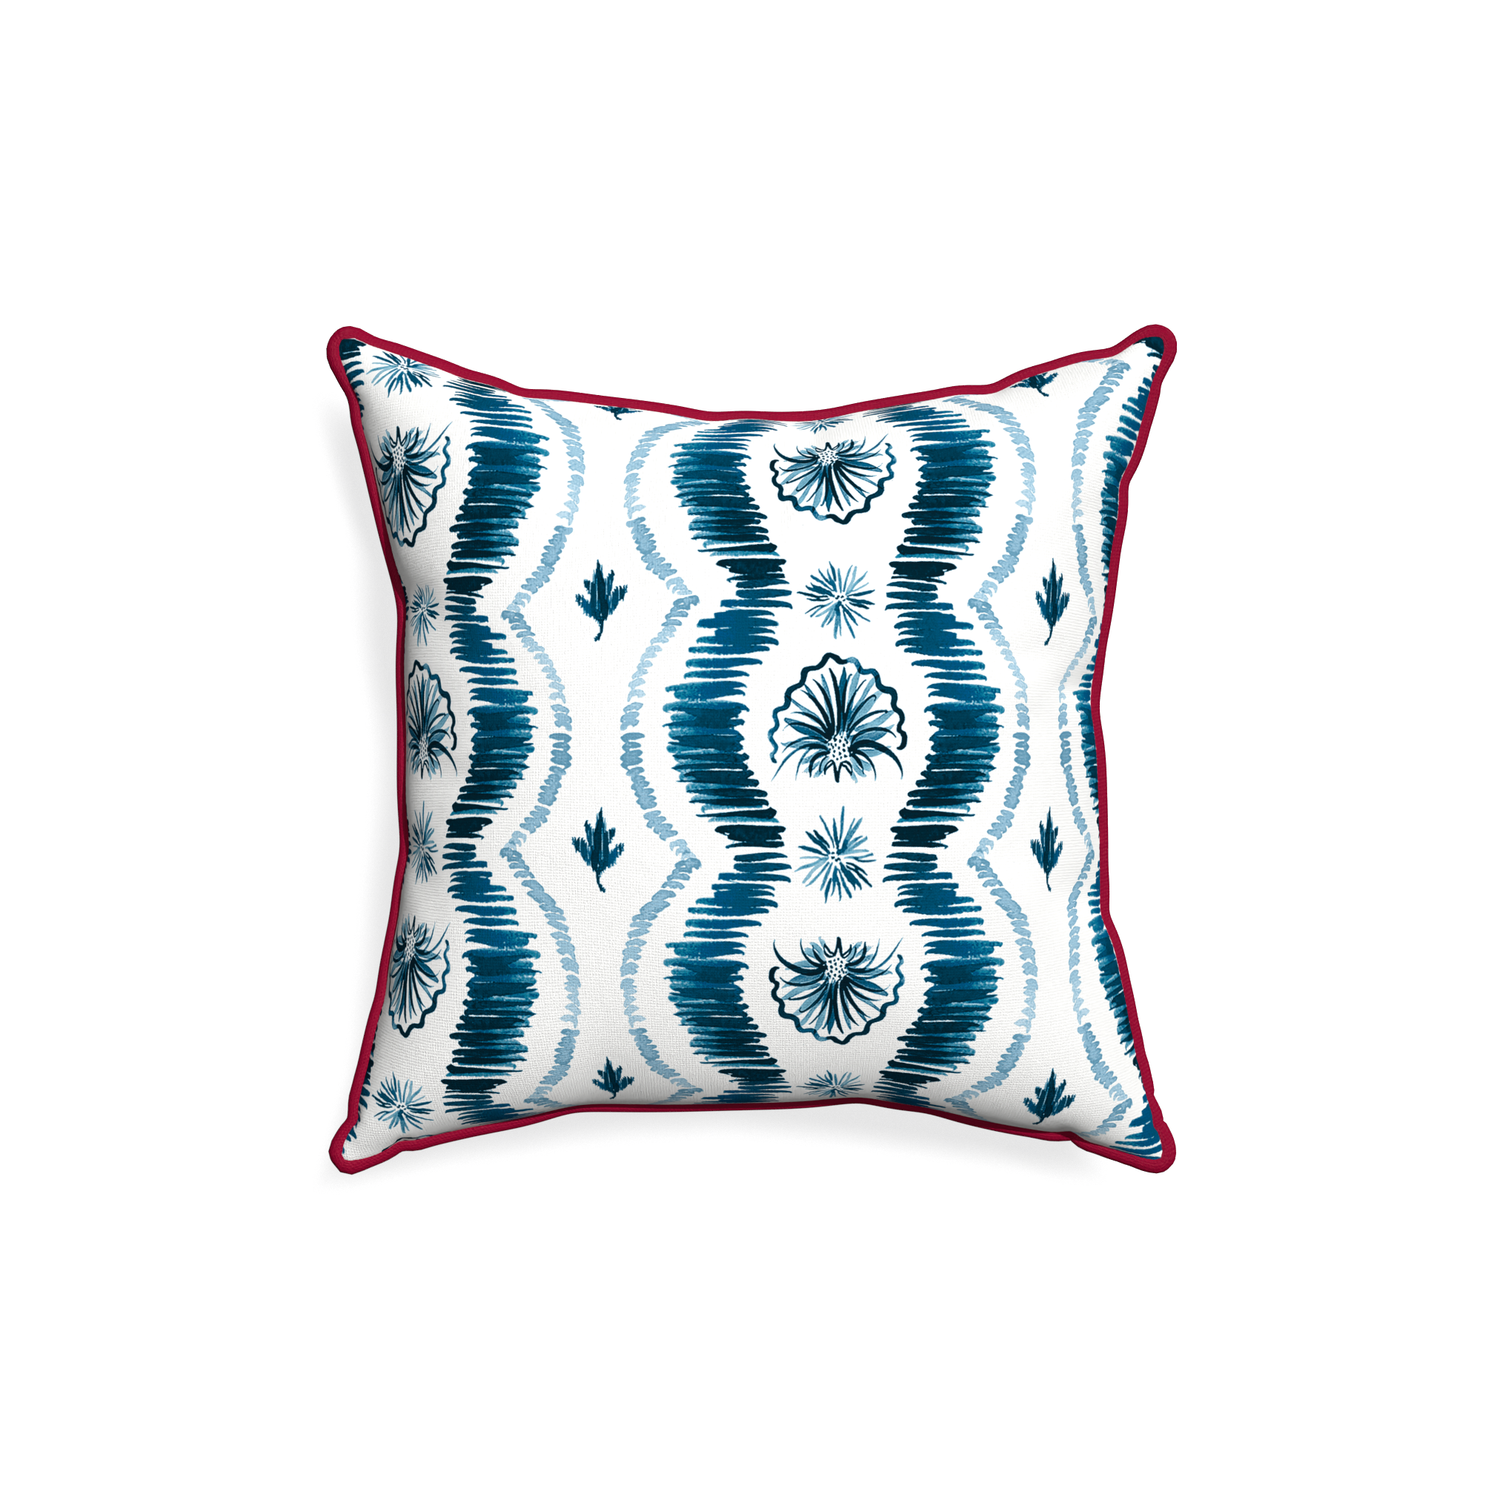 18-square alice custom blue ikatpillow with raspberry piping on white background